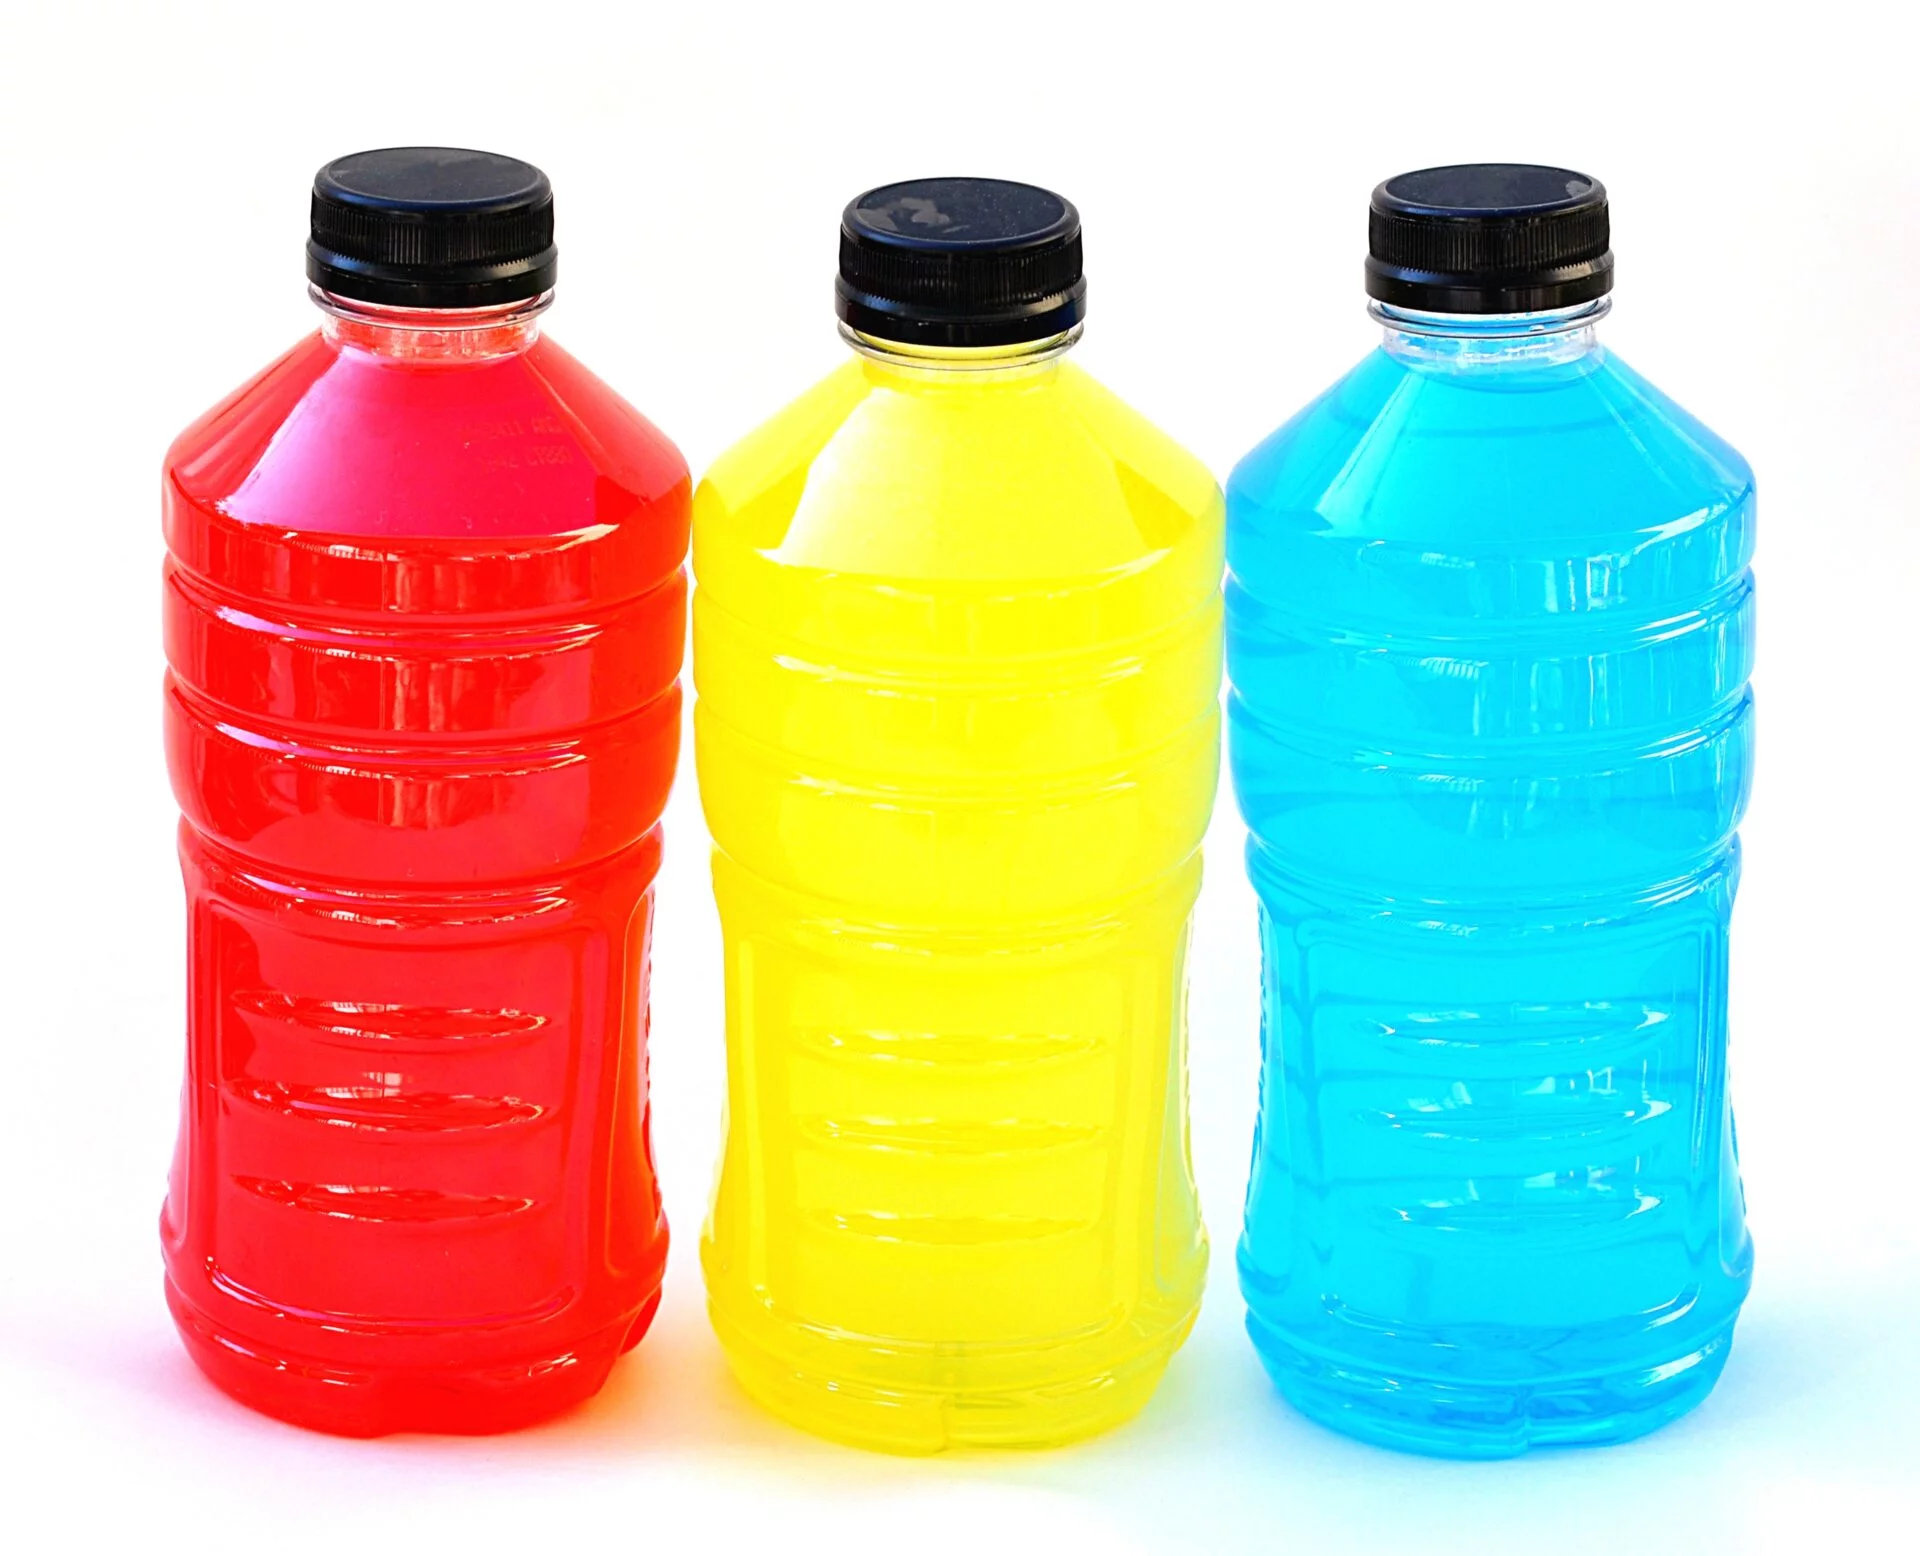 electrolyte replacement drinks in red, yellow & blue